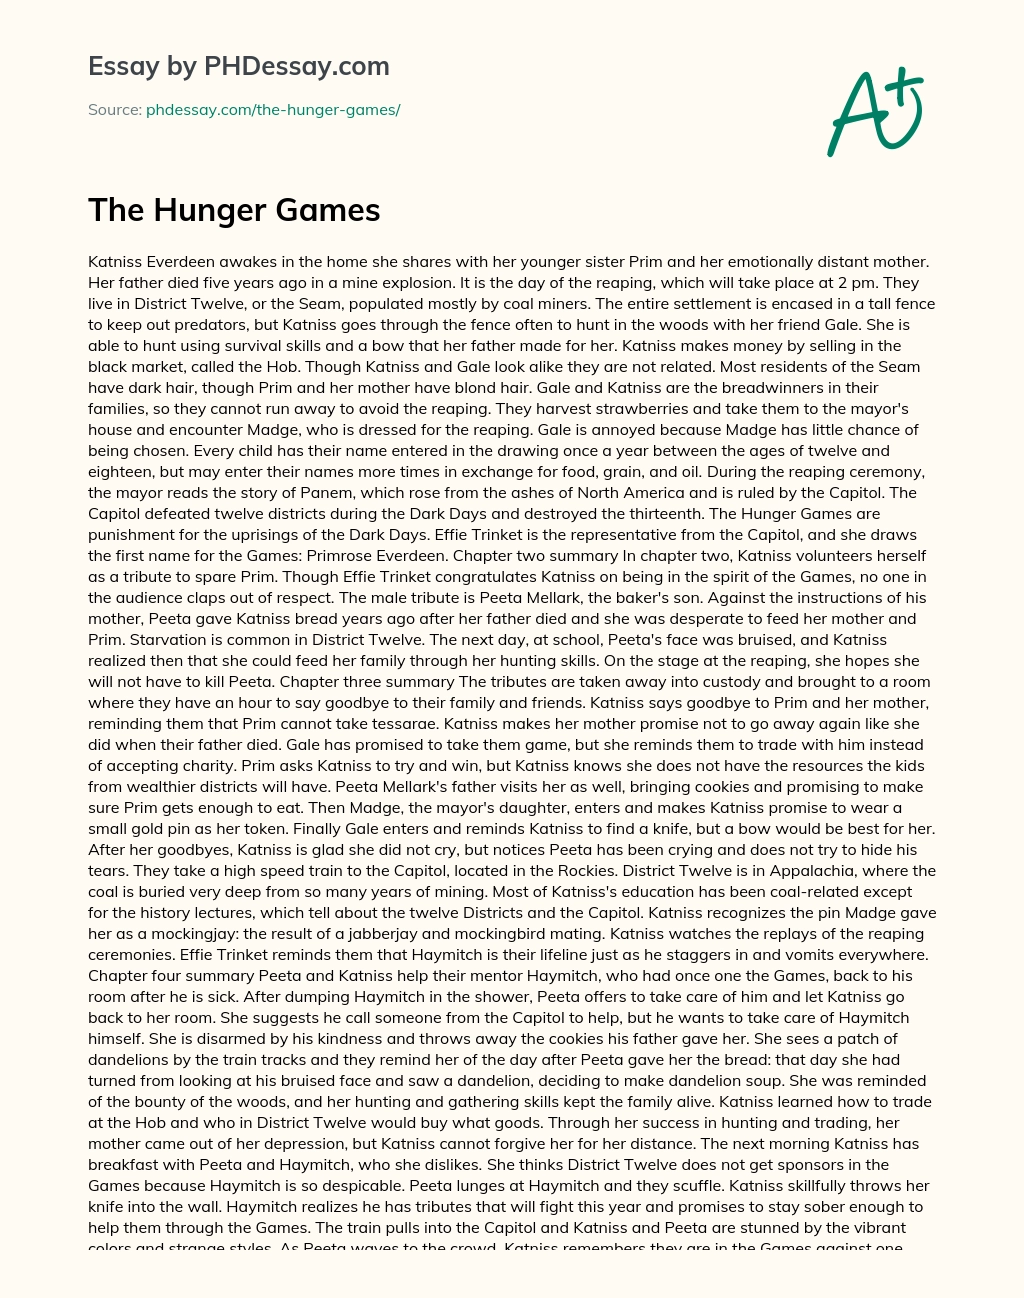 The Hunger Games essay